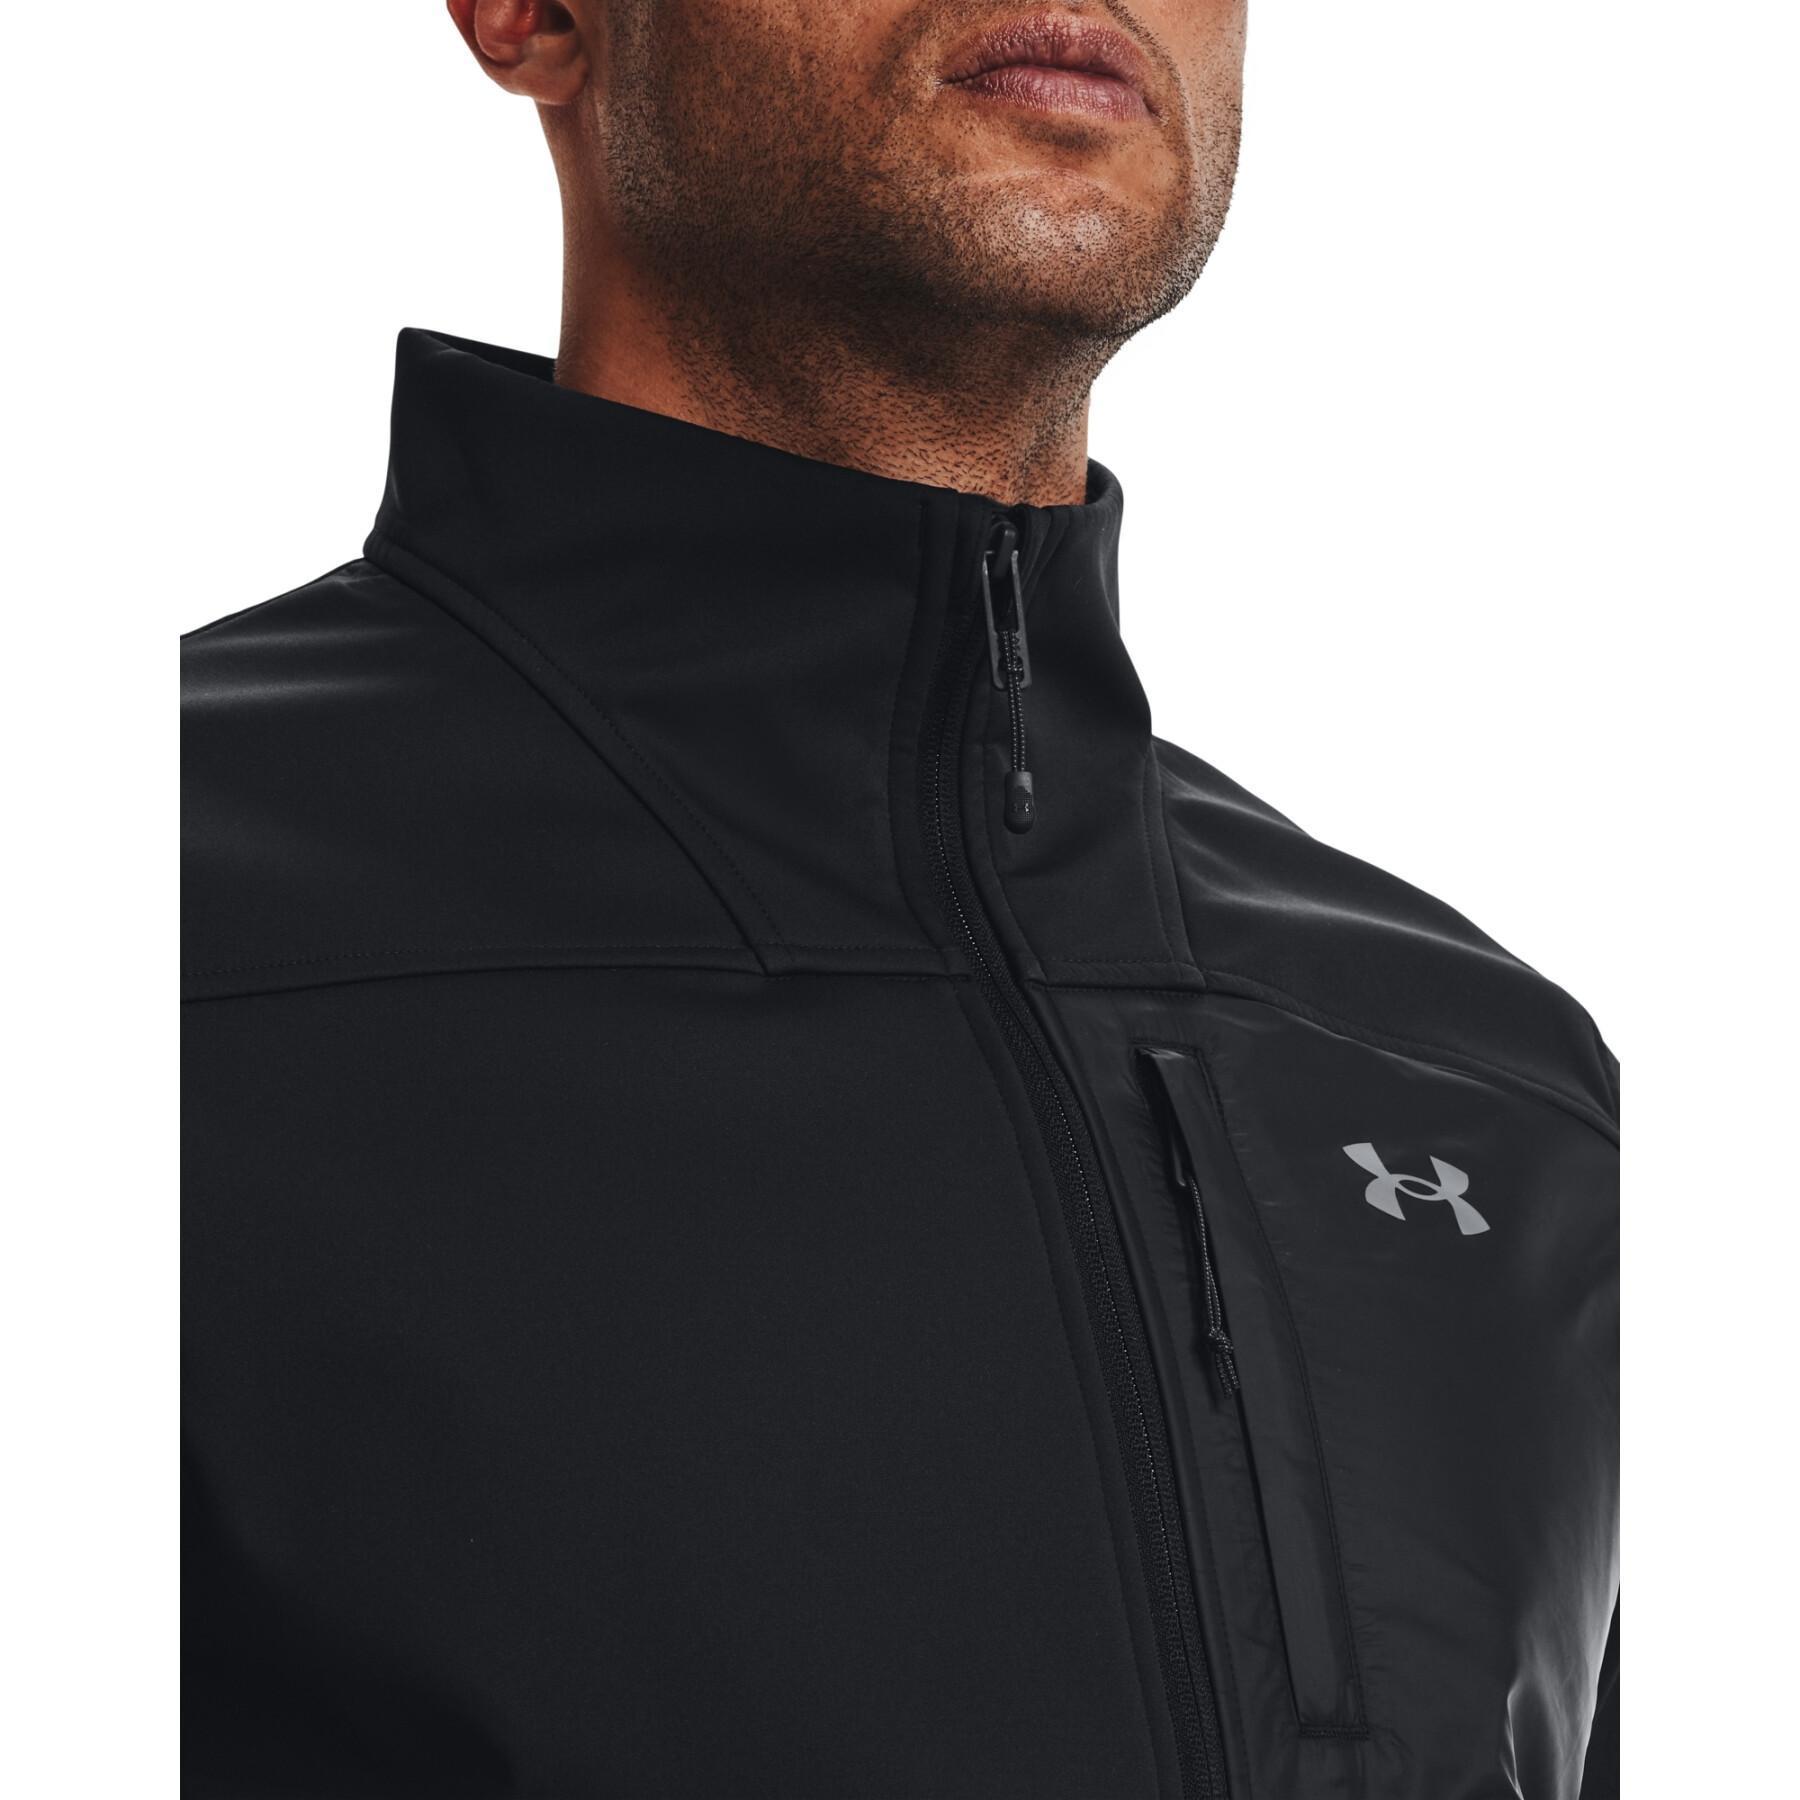 Jacket Under Armour Storm ColdGear® Infrared Shield 2.0